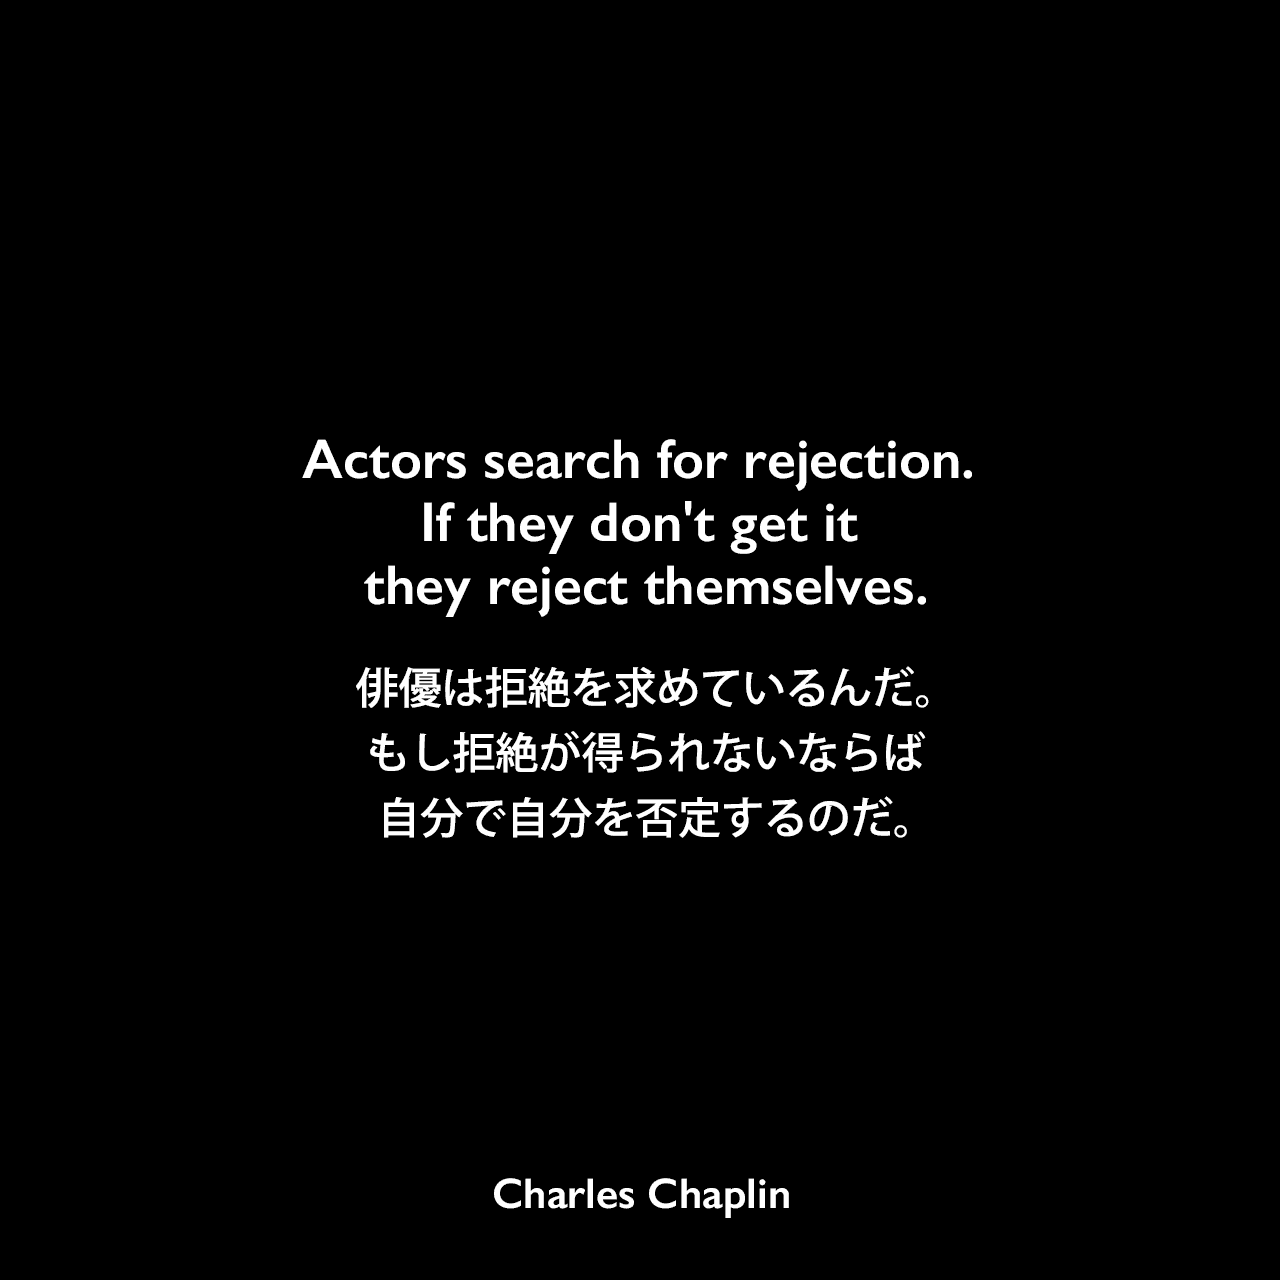 Actors search for rejection. If they don't get it they reject themselves.俳優は拒絶を求めているんだ。もし拒絶が得られないならば、自分で自分を否定するのだ。Charles Chaplin